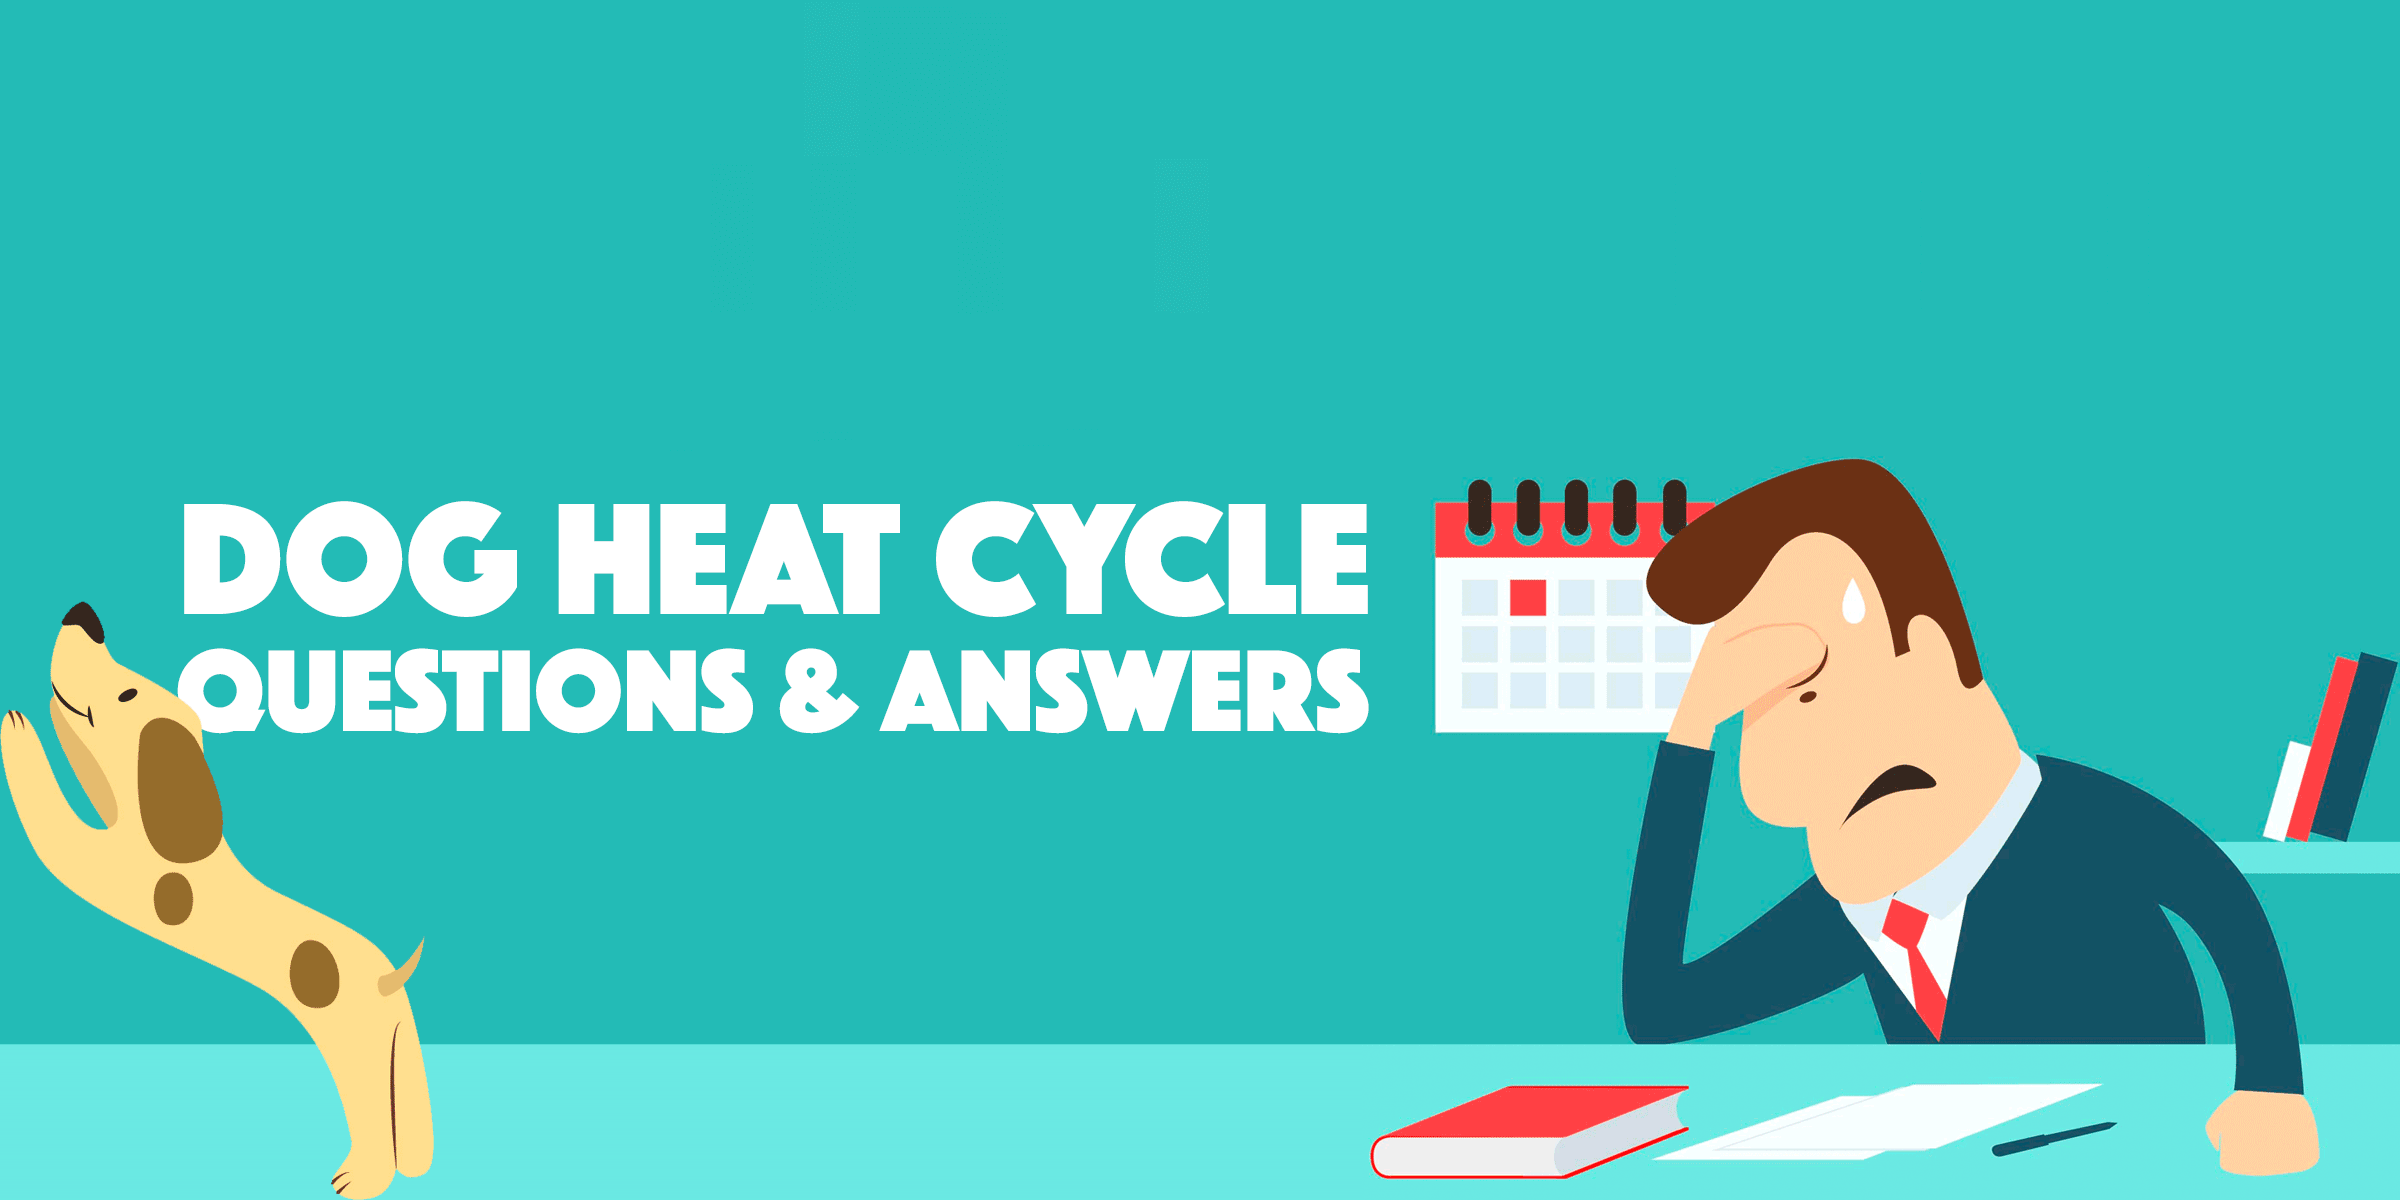 Dog Heat Cycle Frequently Asked Questions Answers,Prayer Shawl Tallit